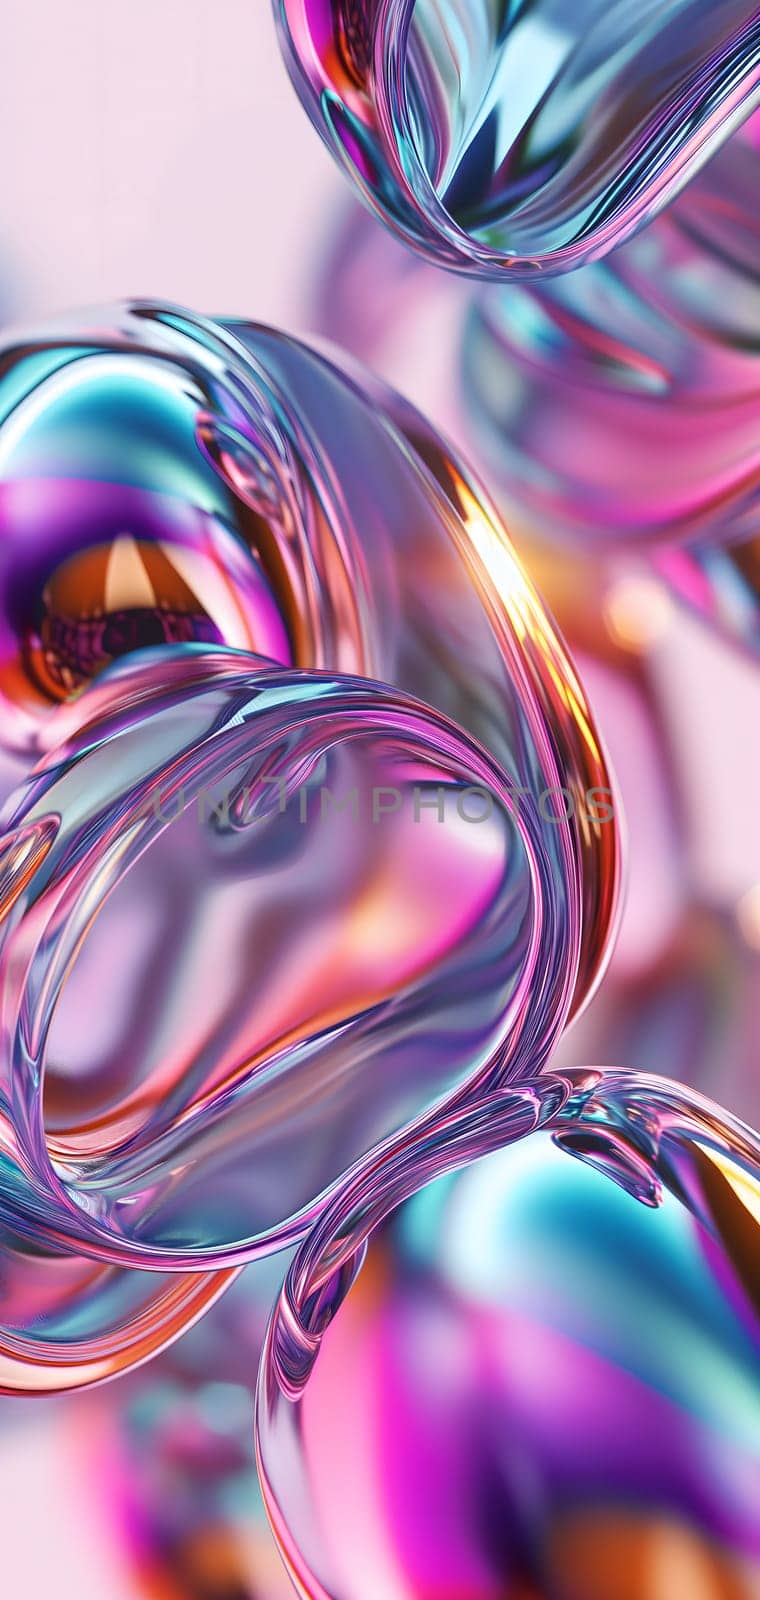 colorful glass bubbles and waves background and wallpaper by z1b